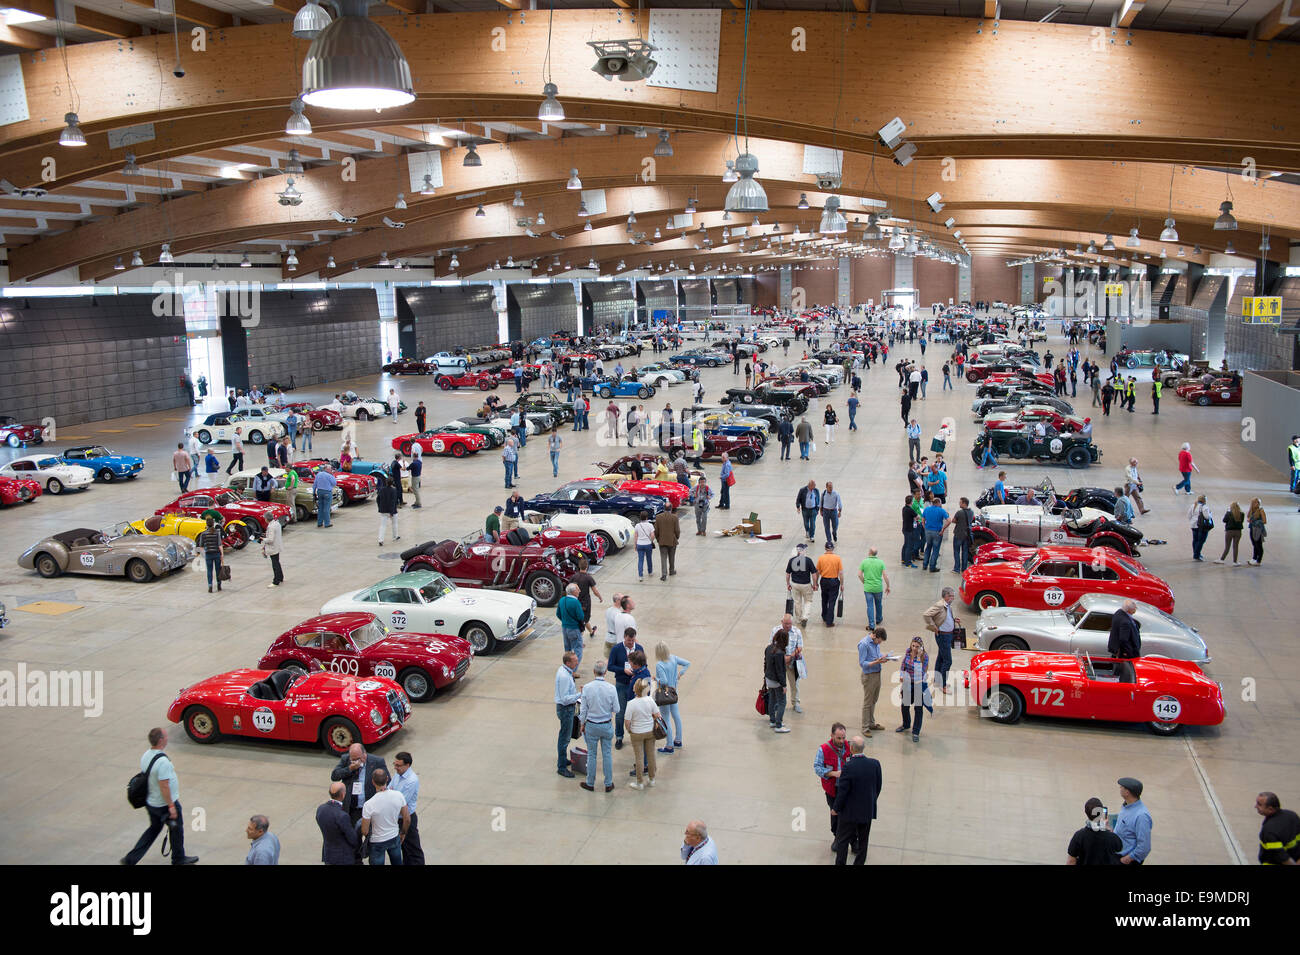 Exhibition hall, exhibition, classic cars, race cars, Mille Miglia car race, Brescia, Lombardy, Italy Stock Photo